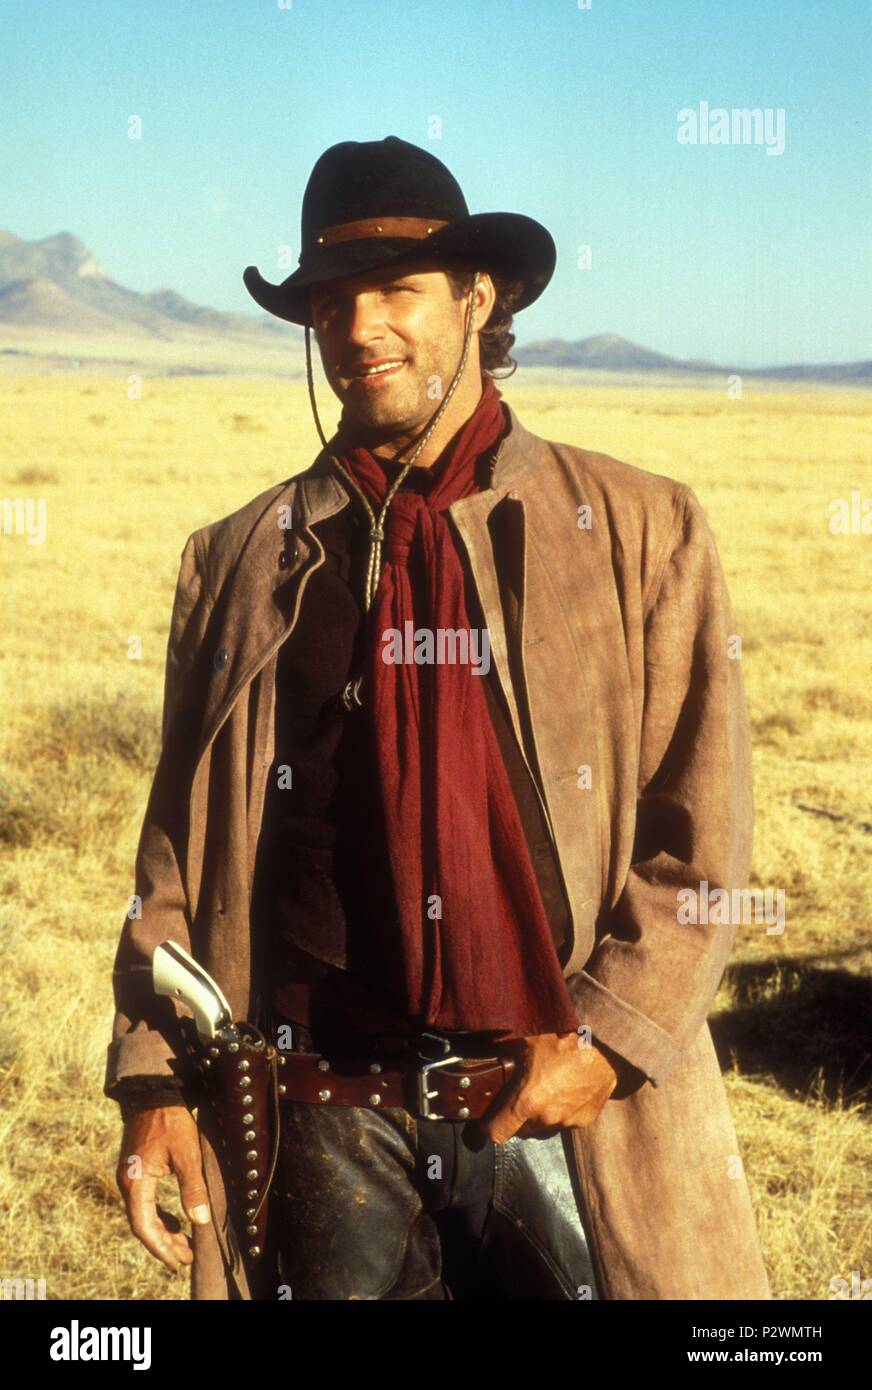 Original Film Title: RED RIVER.  English Title: RED RIVER.  Film Director: RICHARD MICHAELS.  Year: 1988.  Stars: GREGORY HARRISON. Credit: MGM/UA TELEVISION / Album Stock Photo